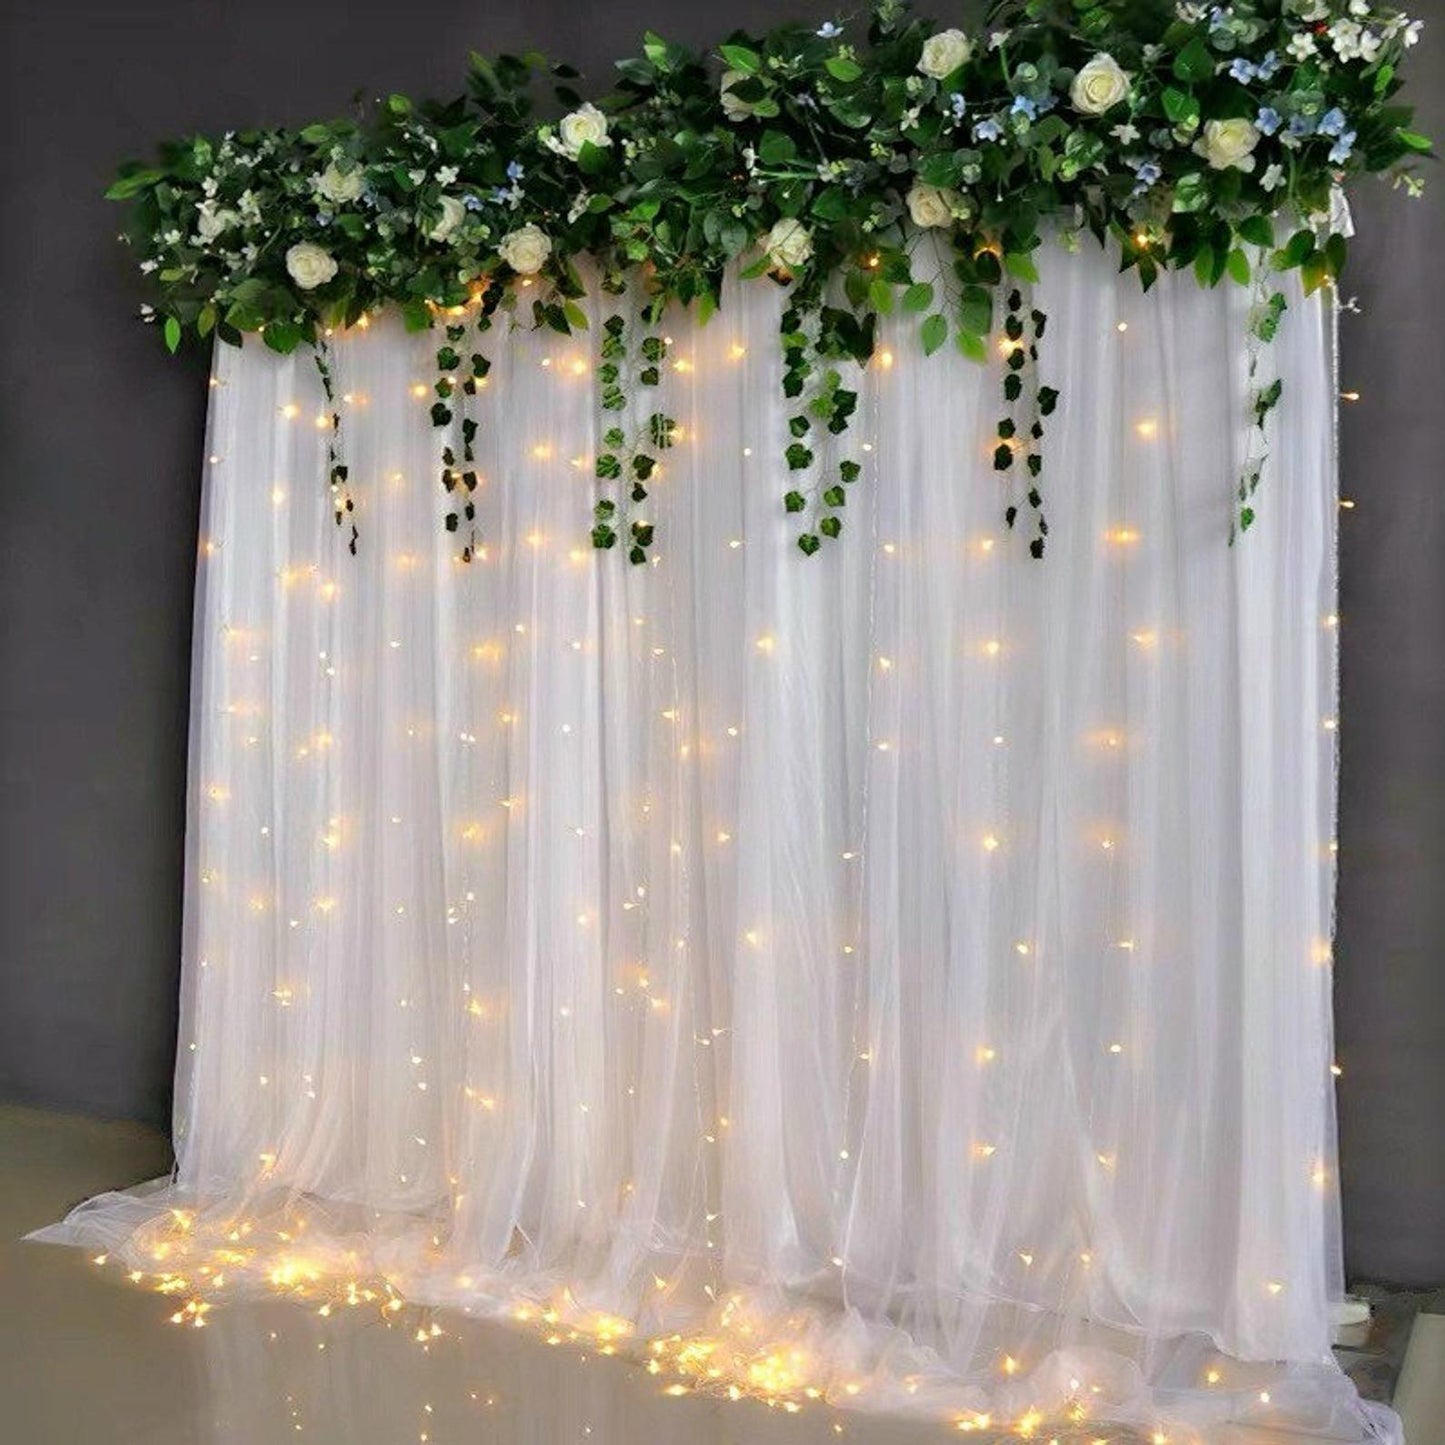 Window Curtain String Lights for Garden Decorations